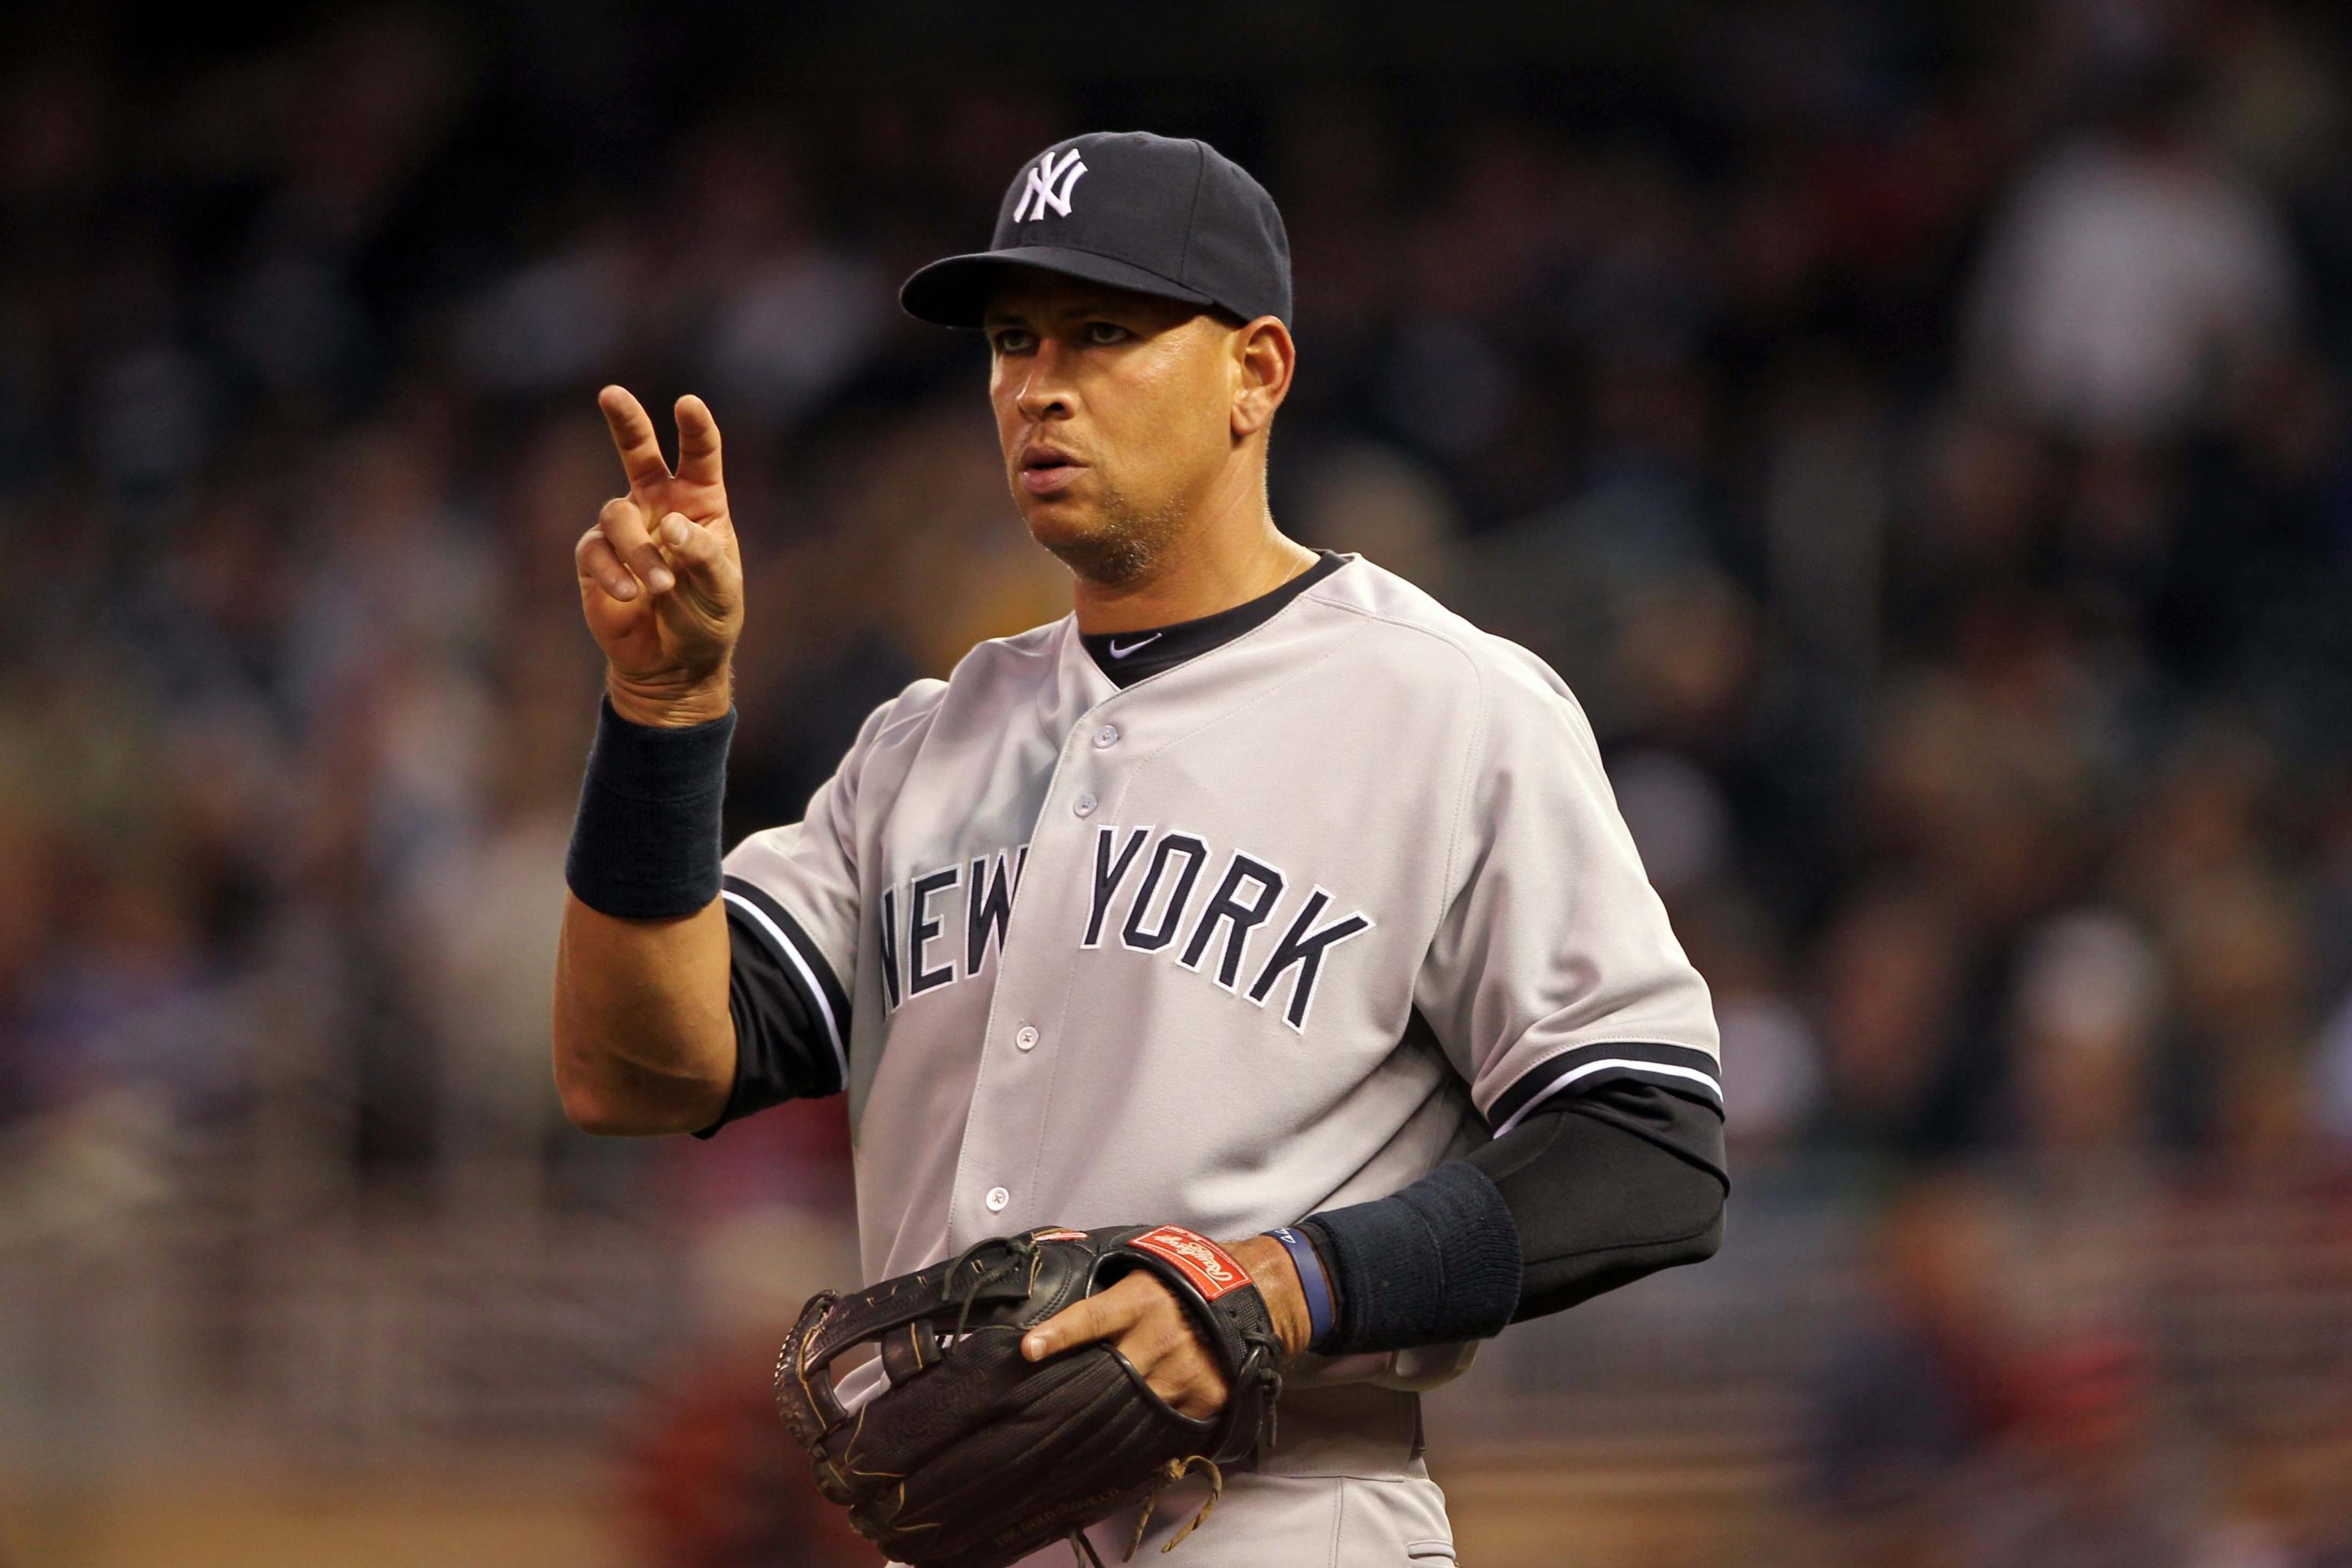 Alfonso Soriano trade: Should the Yankees try Vernon Wells at